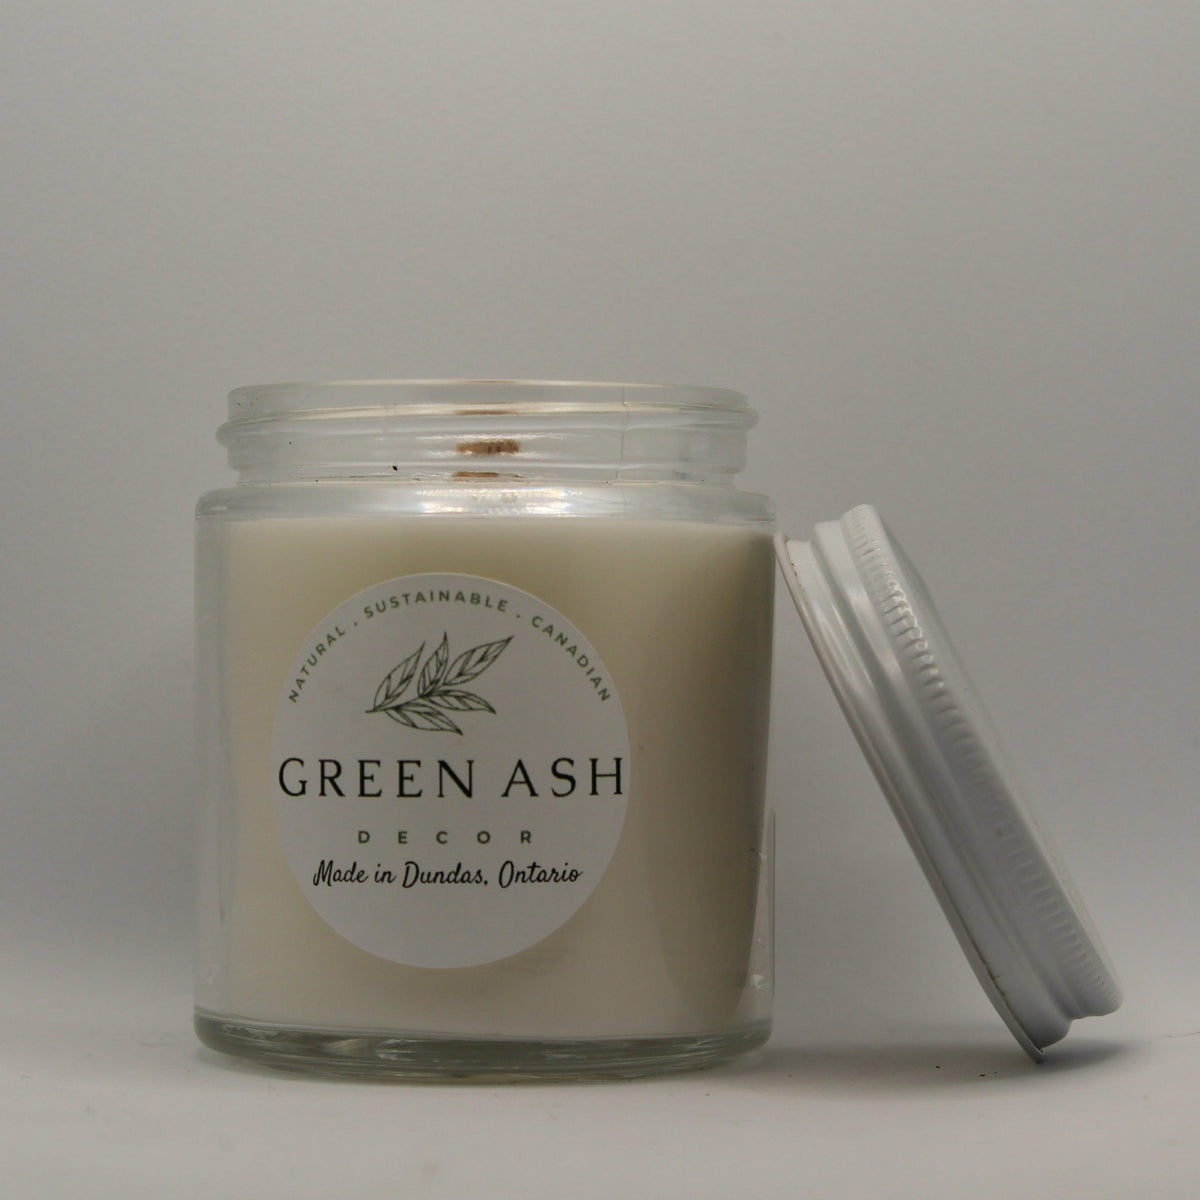 40% Discount applies in Cart. 4oz Jar with White Tin Lid and Crackling Wooden Wick - Green Ash Decor